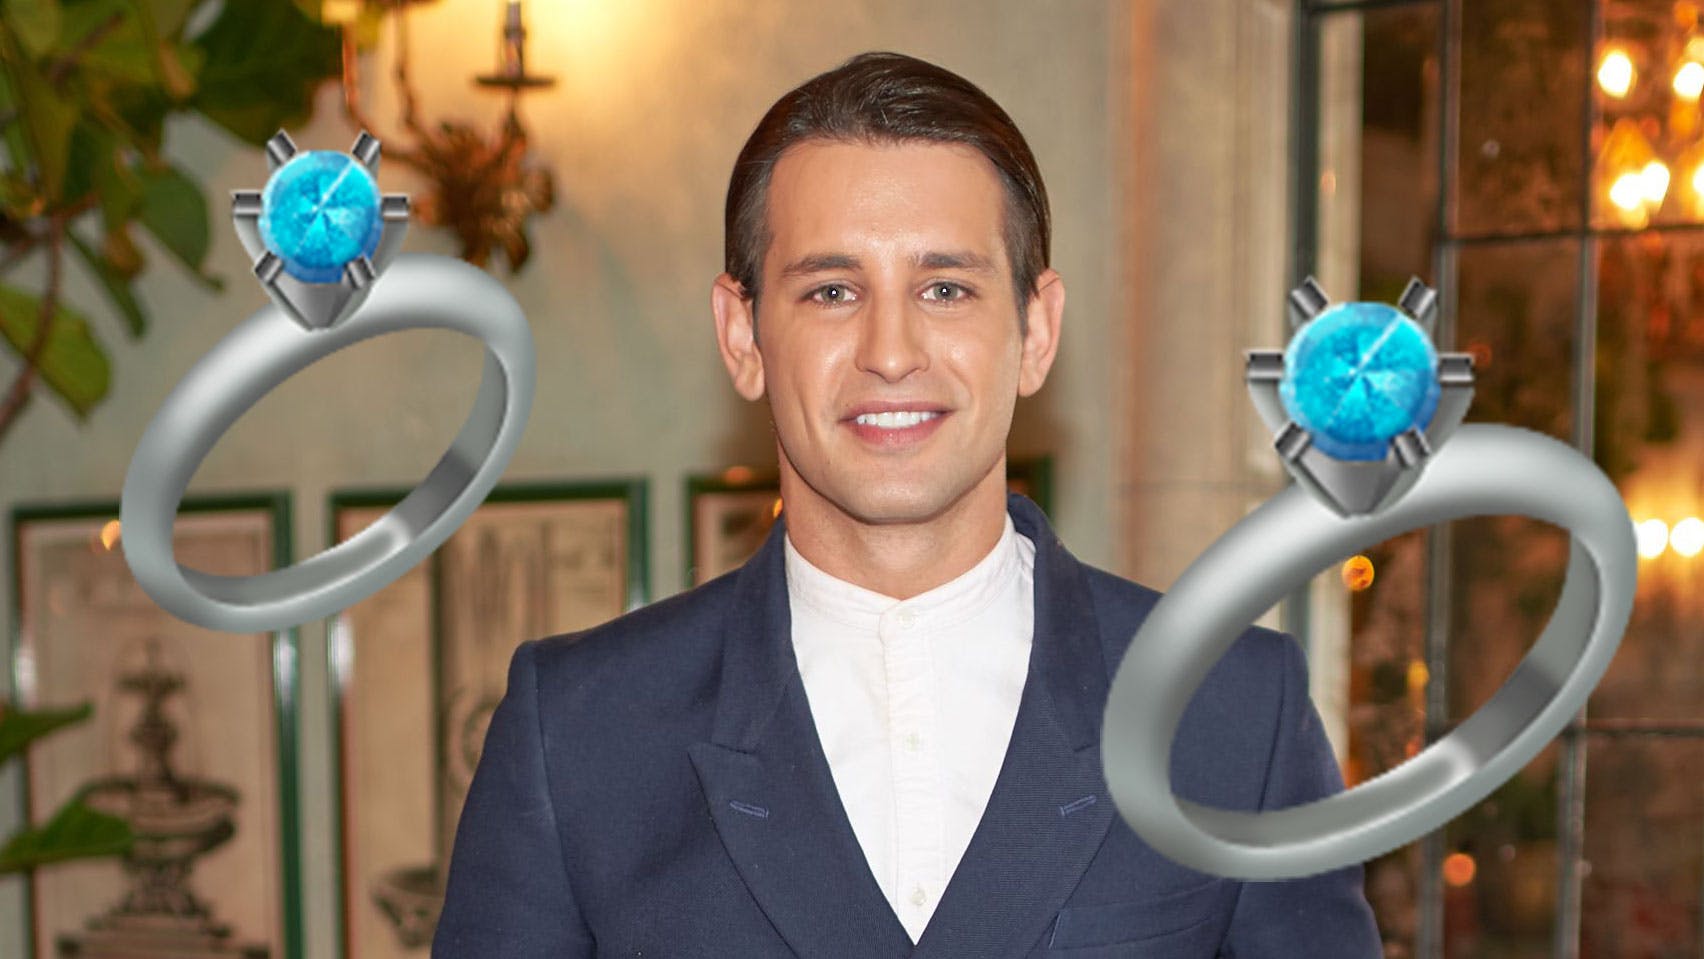 Ollie Locke shows off BEAUTIFUL engagement ring after announcing